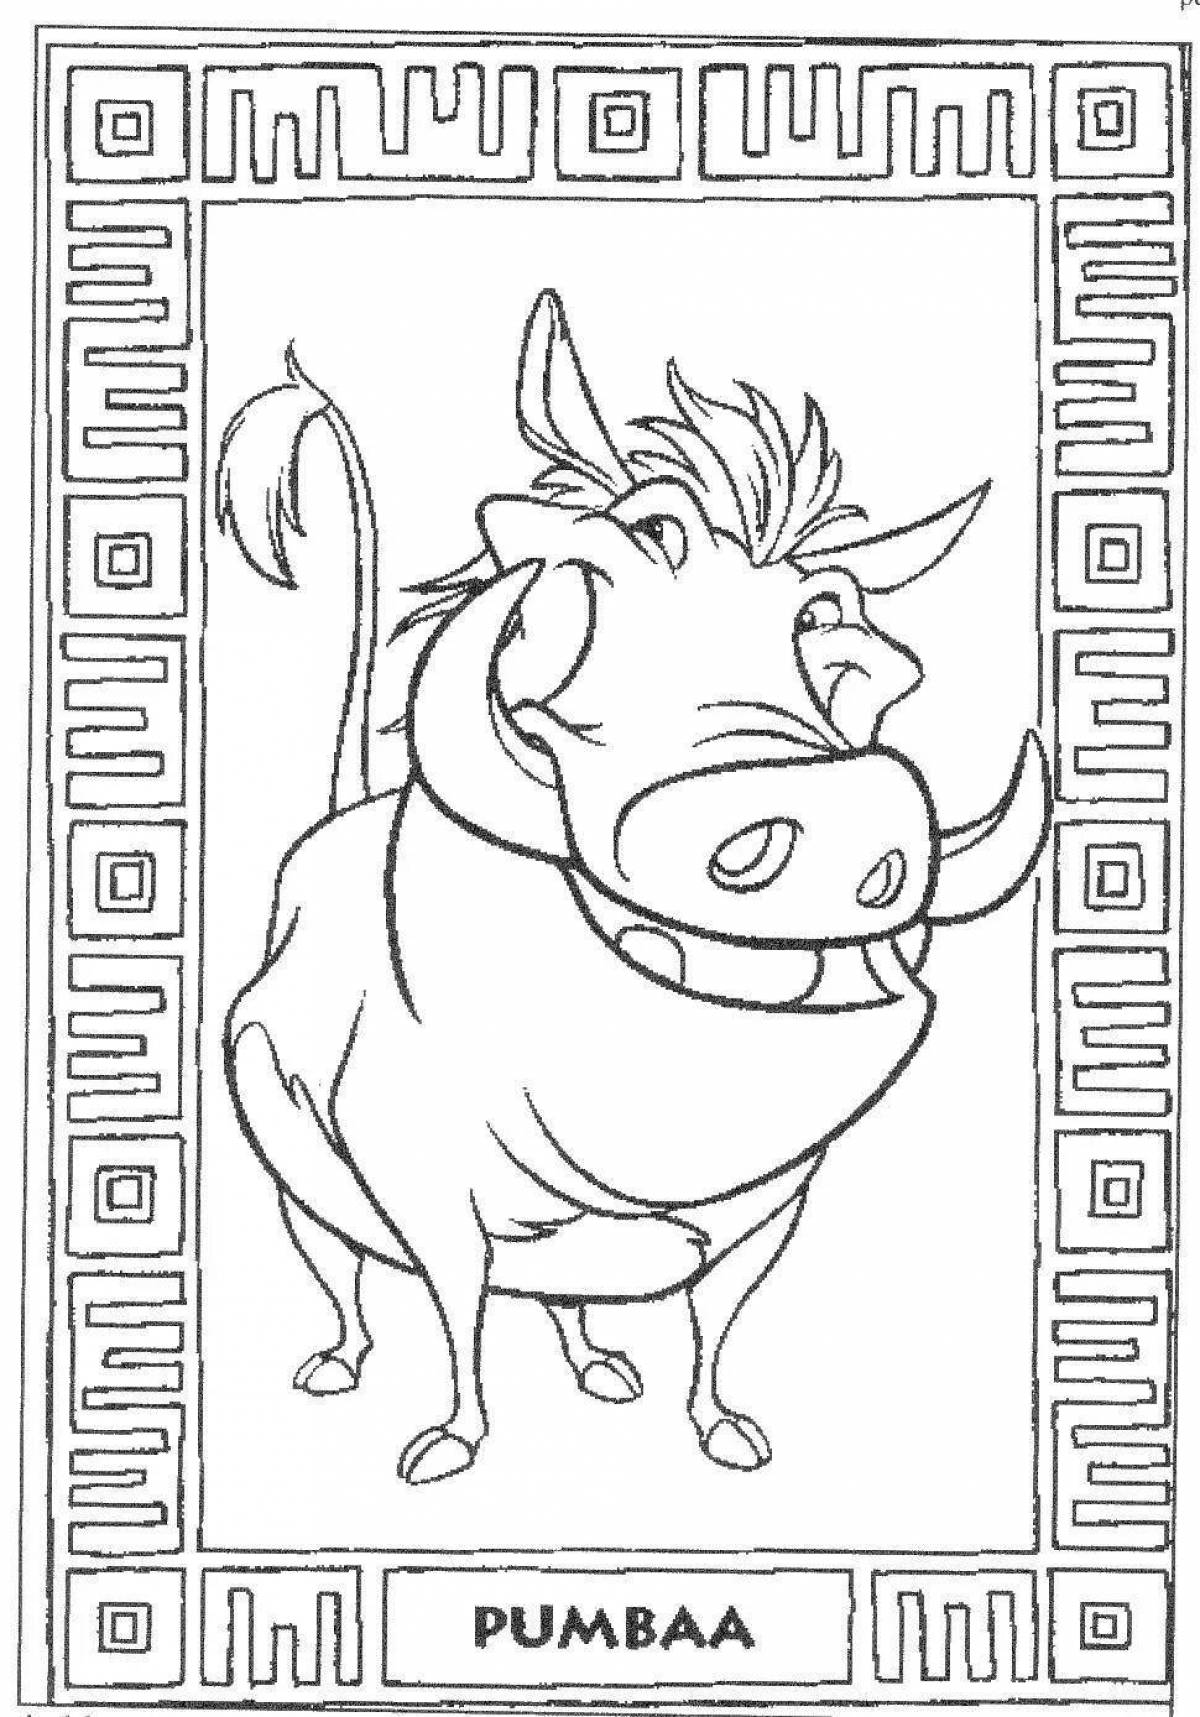 Exciting pumba coloring book